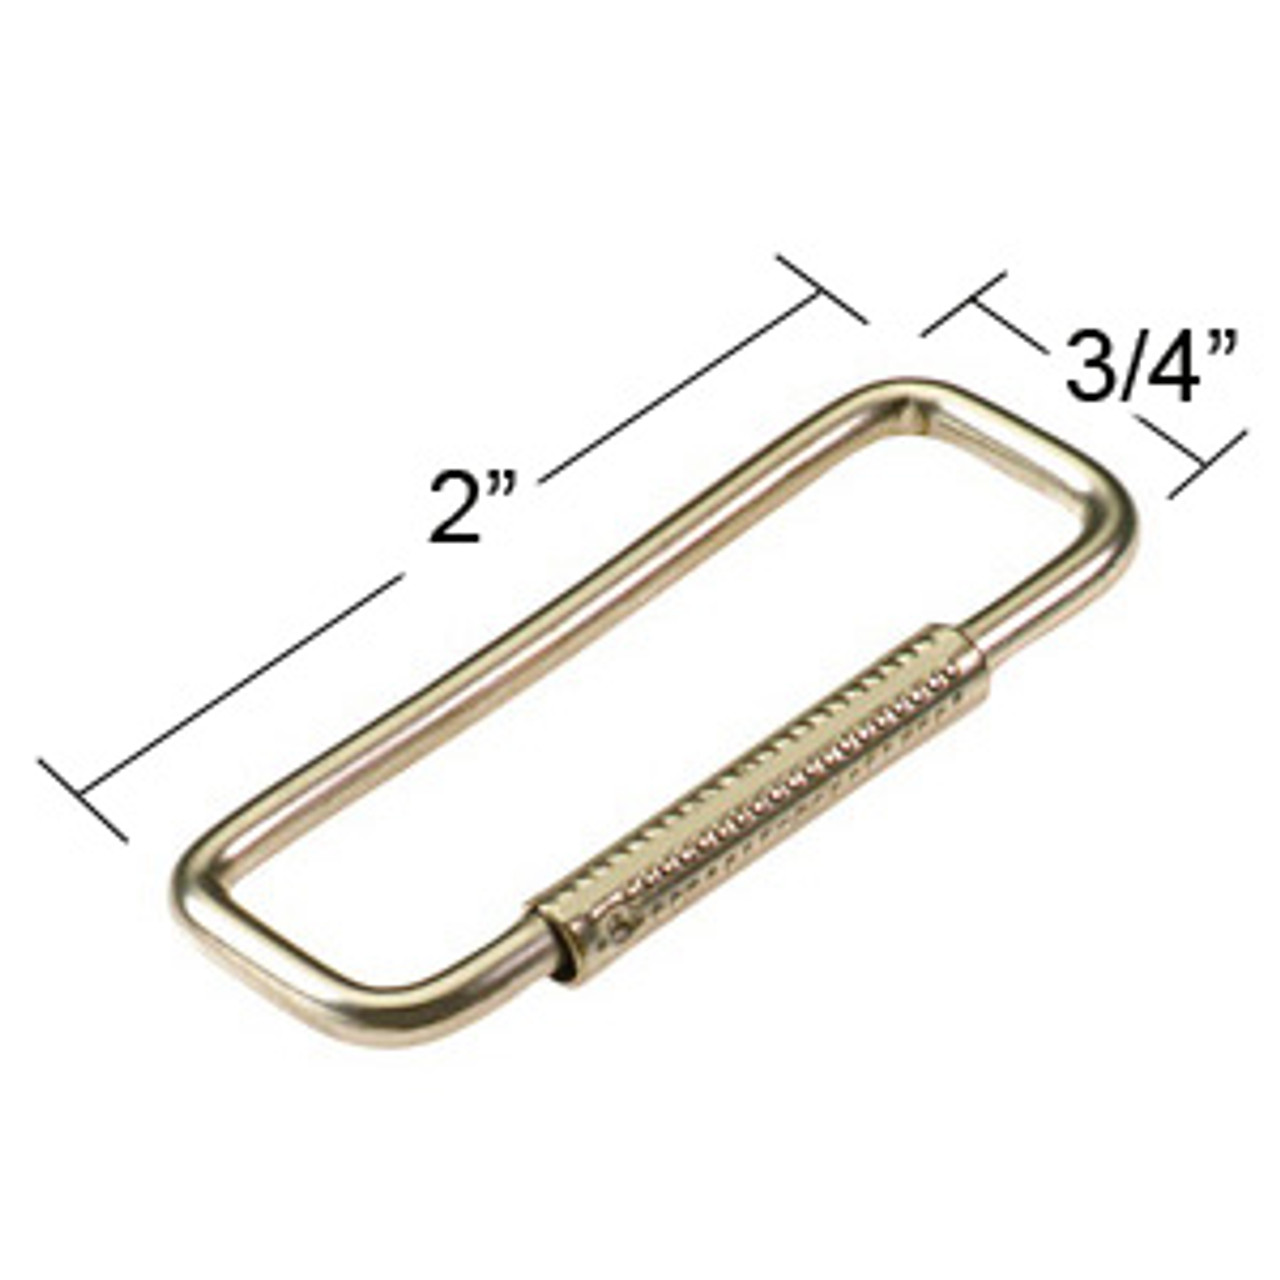 Shop for and Buy Plain Wire Key Ring 3/4 Inch-Bulk Pack of 1000 at .  Large selection and bulk discounts available.